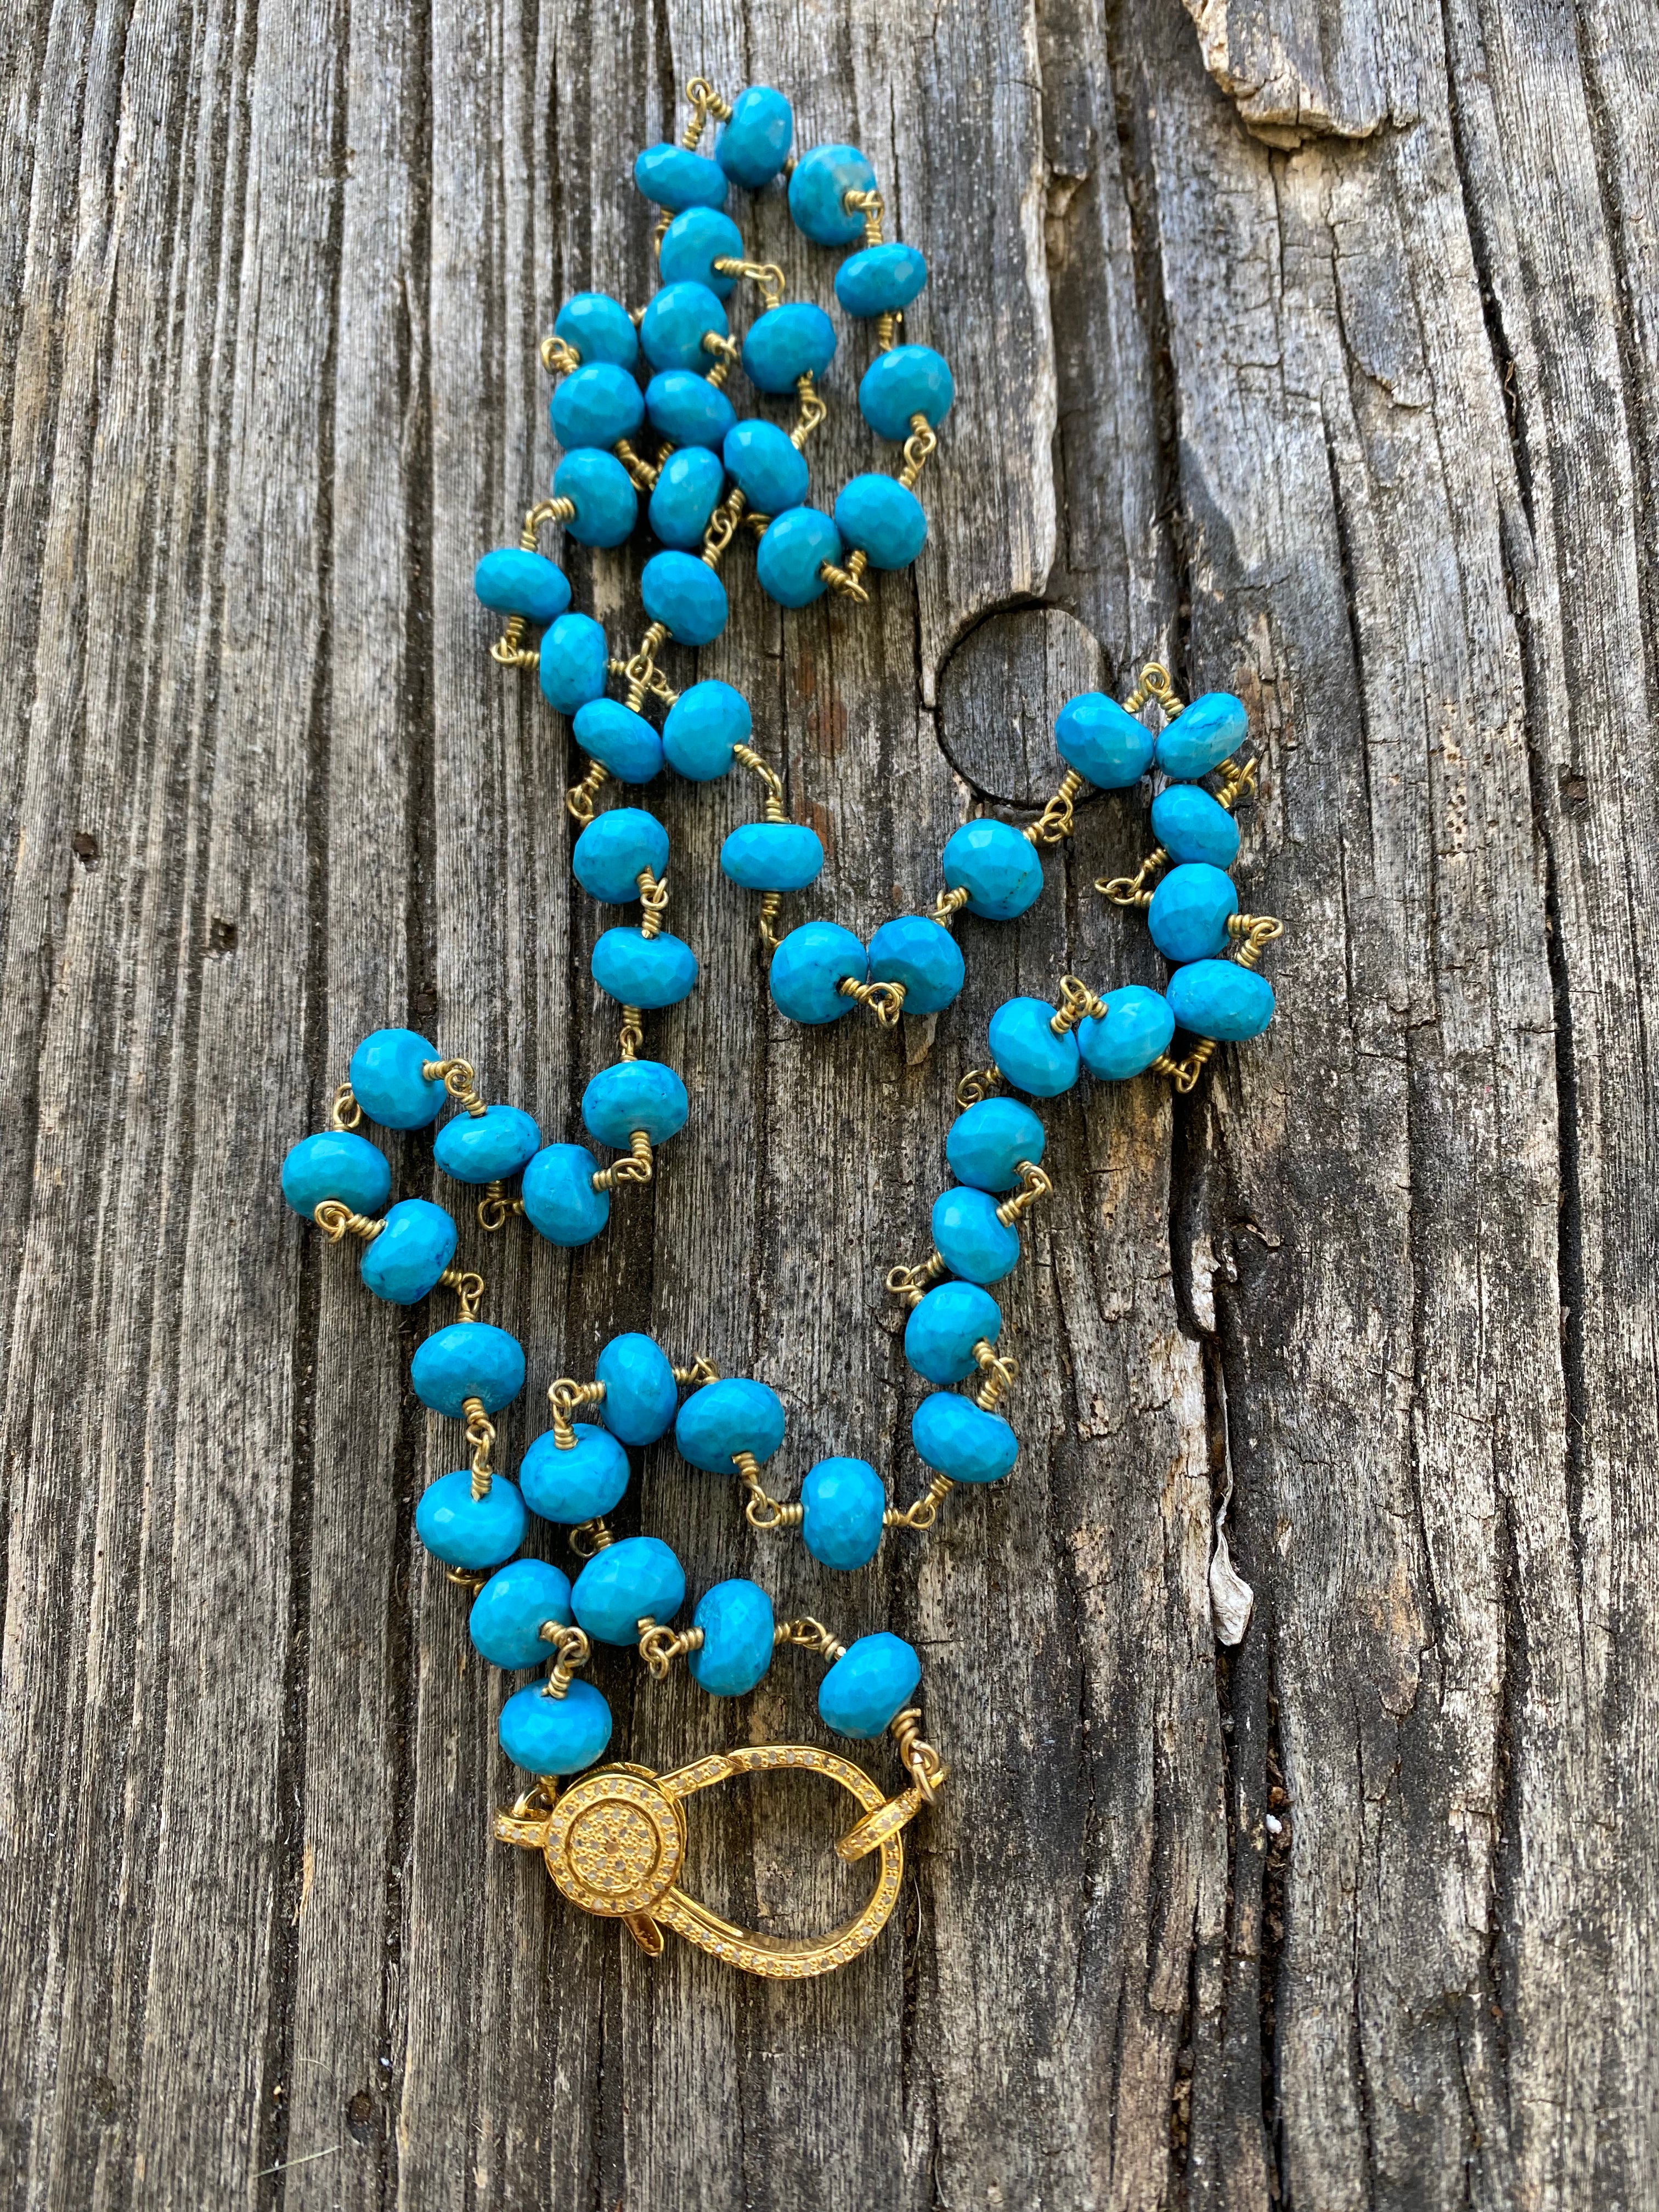 Turquoise Beaded Necklace with Pave Diamond Gold Clasp